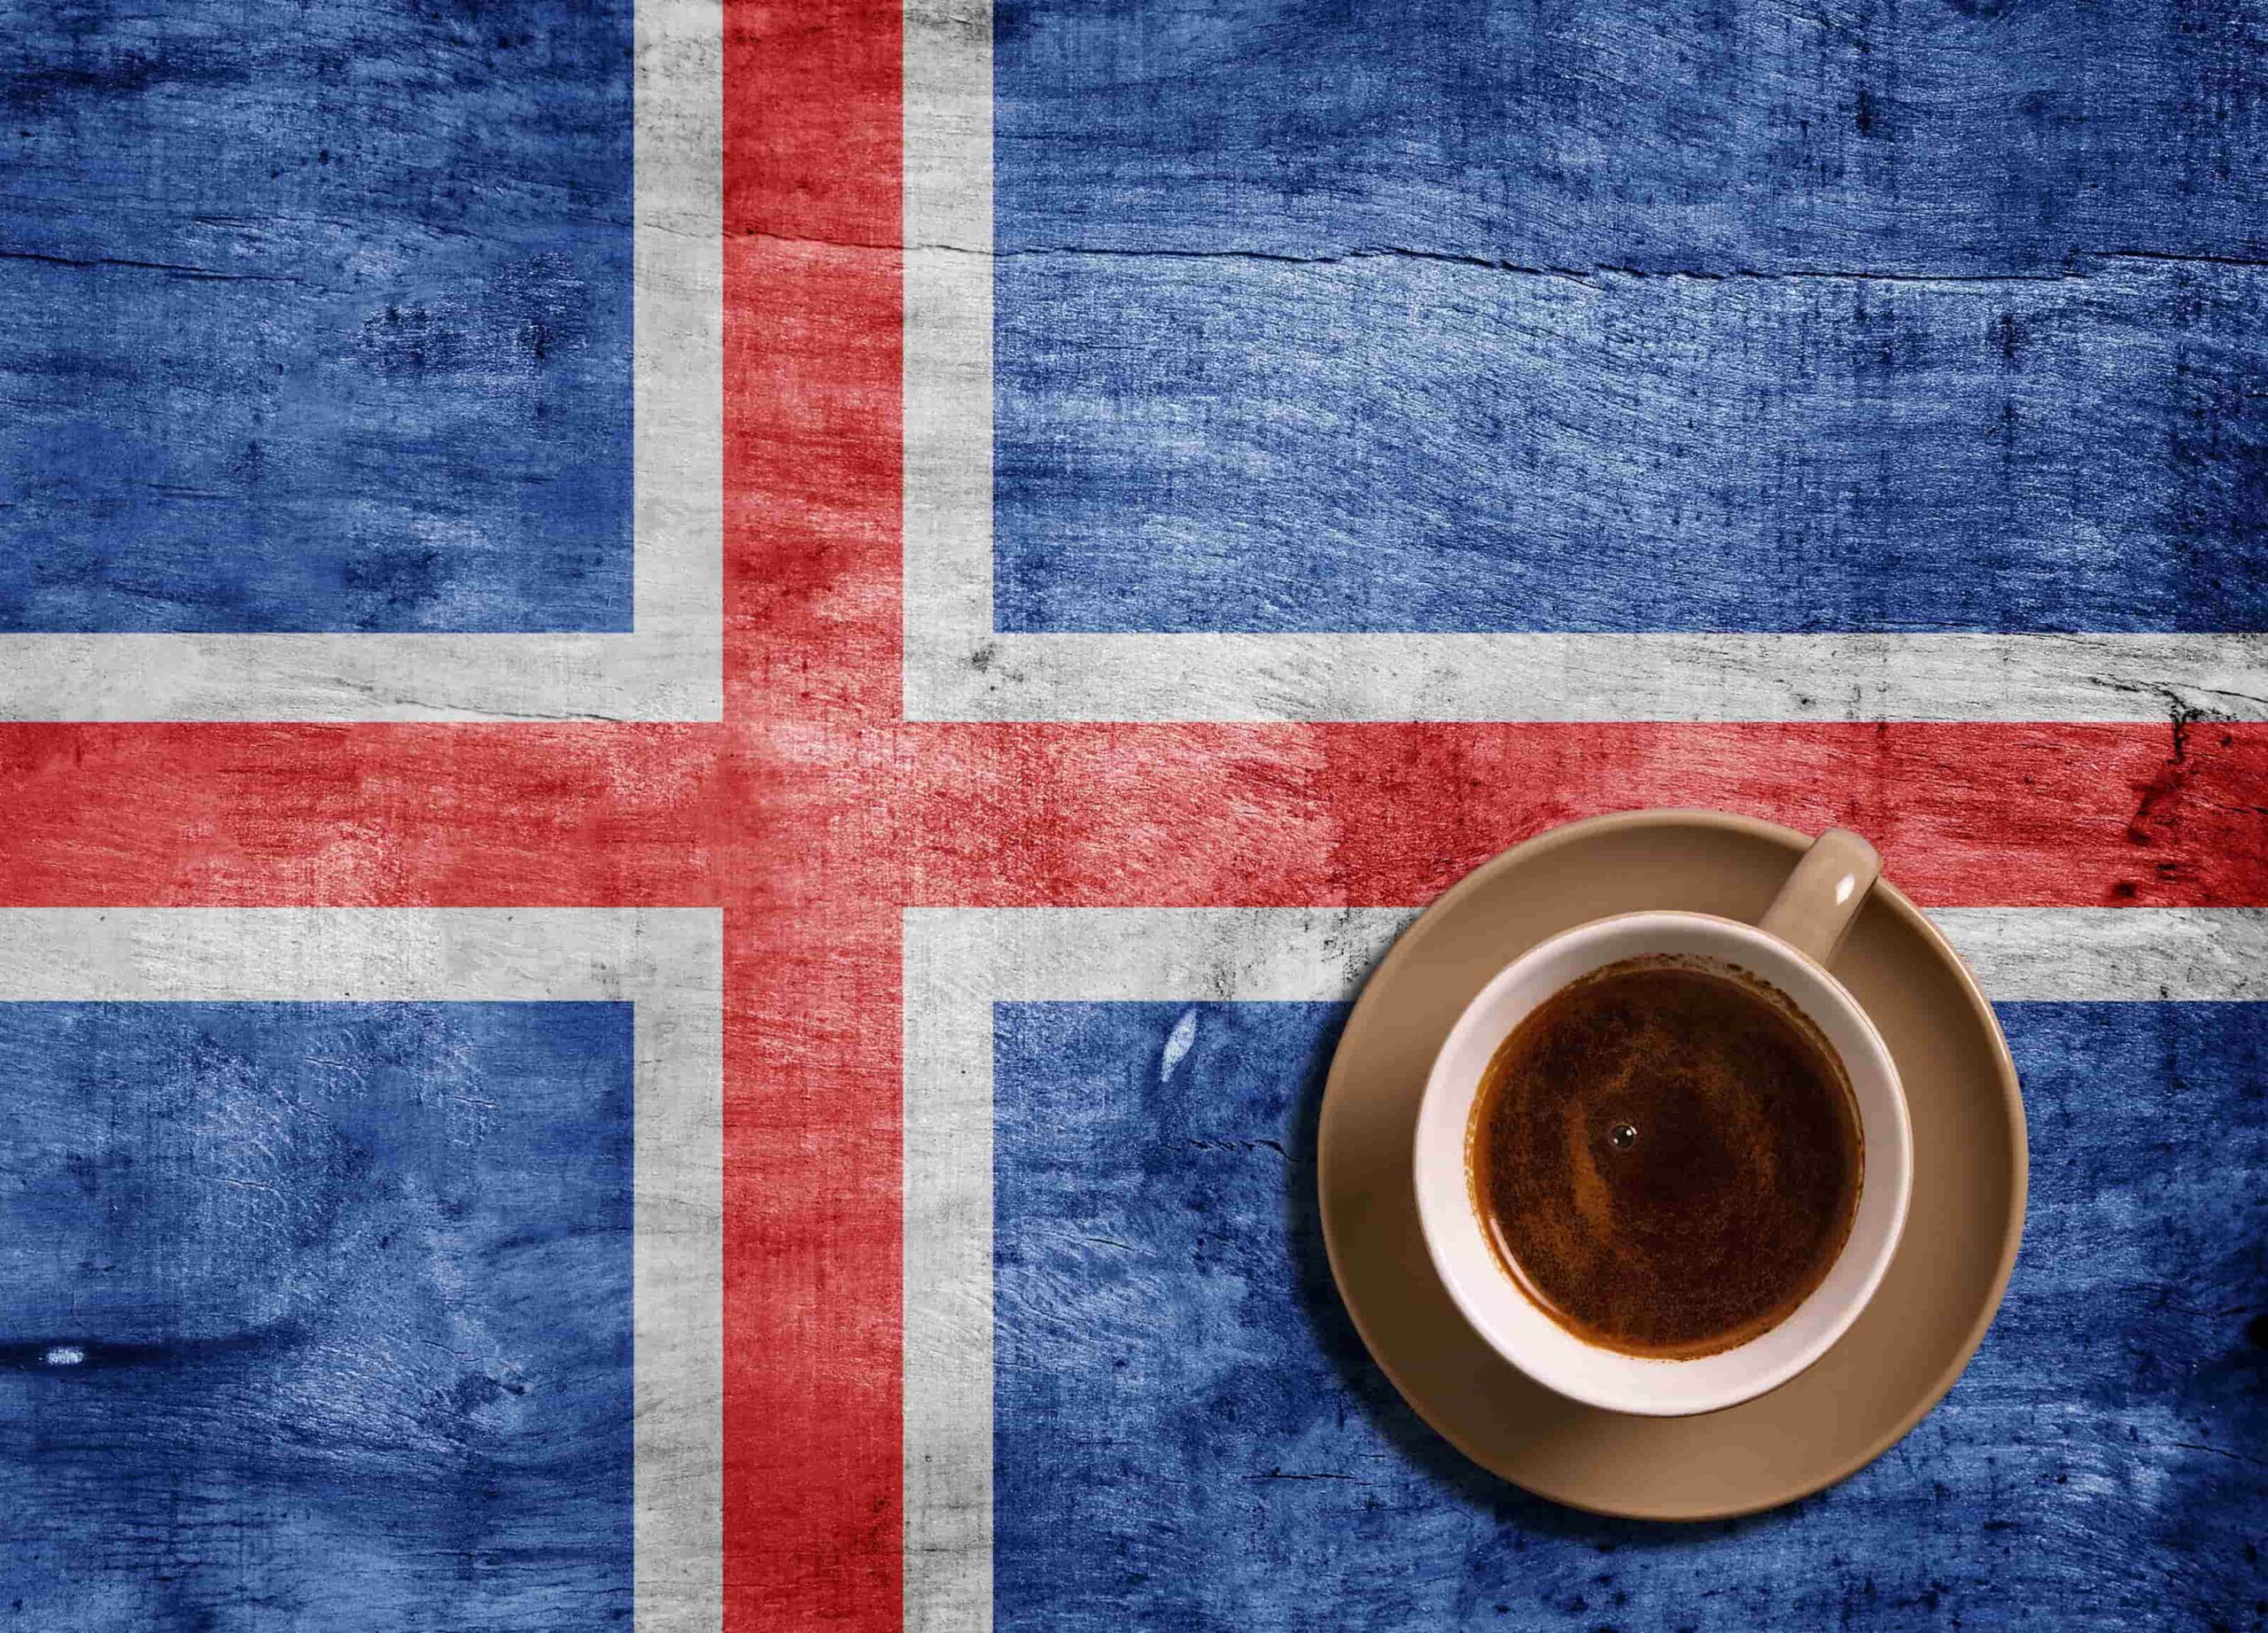 A flag of Iceland with a cup of coffee next to it.